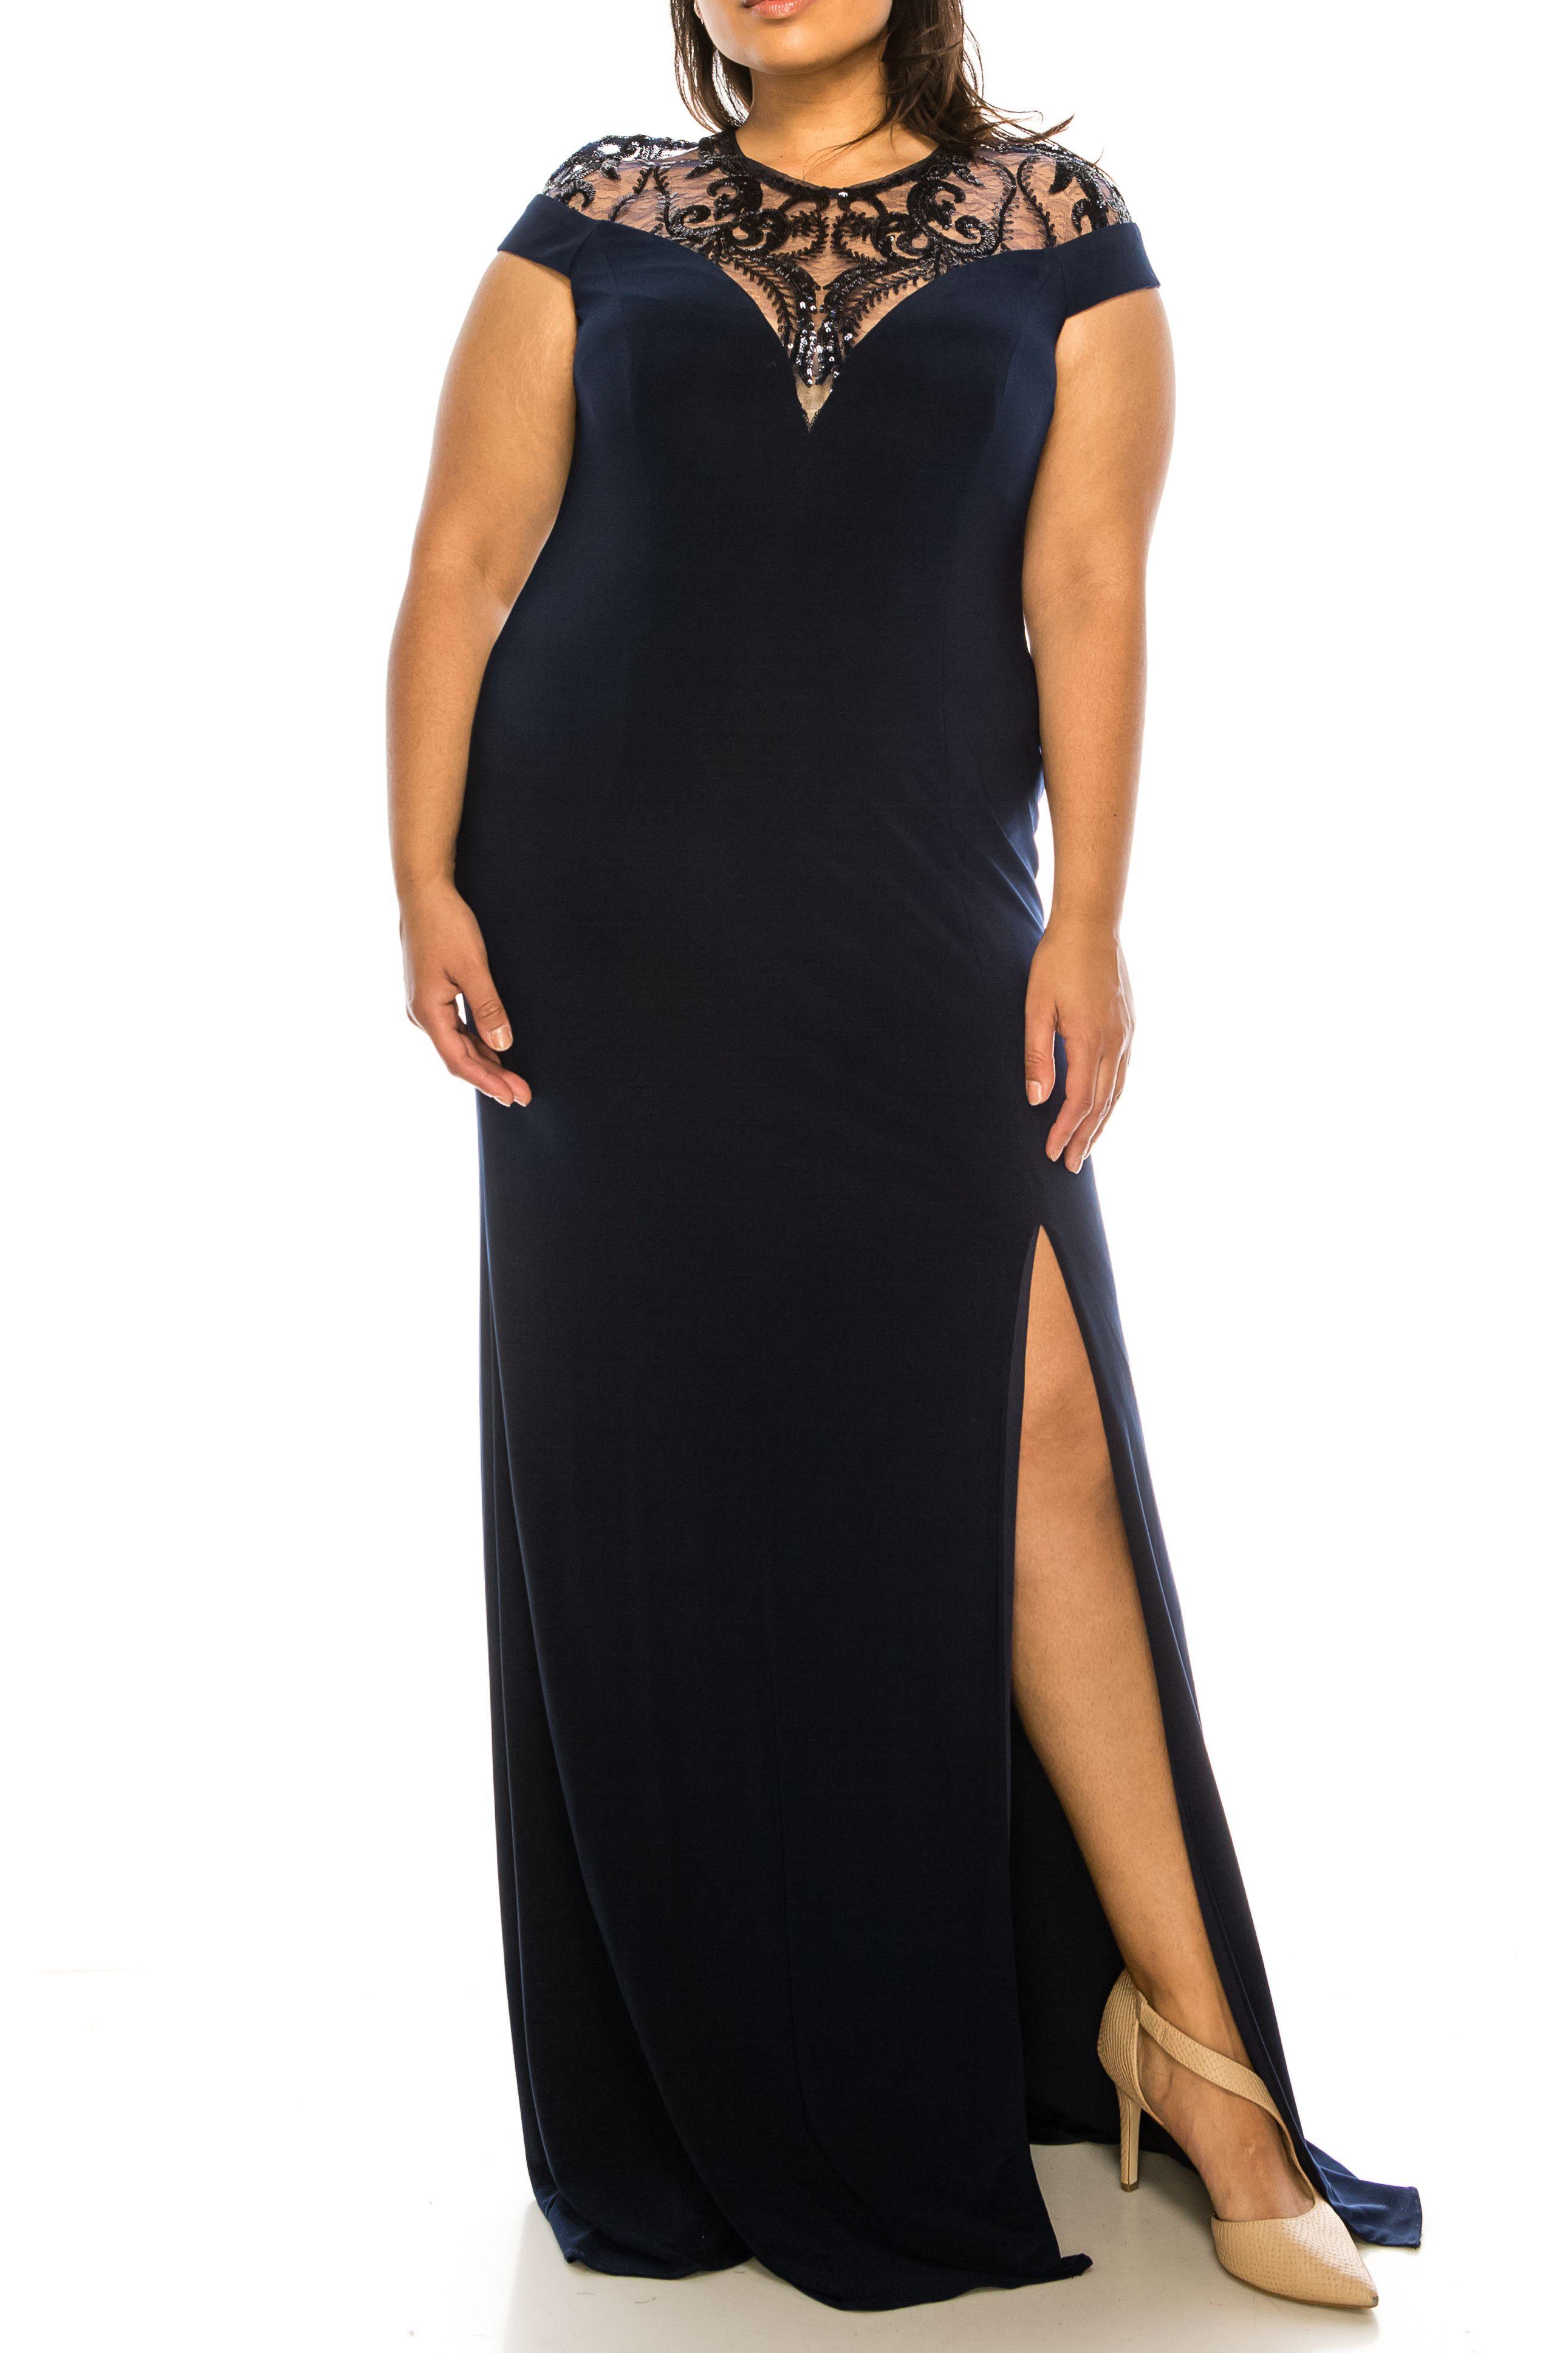 NAVY MIDNIGHT Adrianna Papell AP1E202740 Long Formal Evening Gown for ...